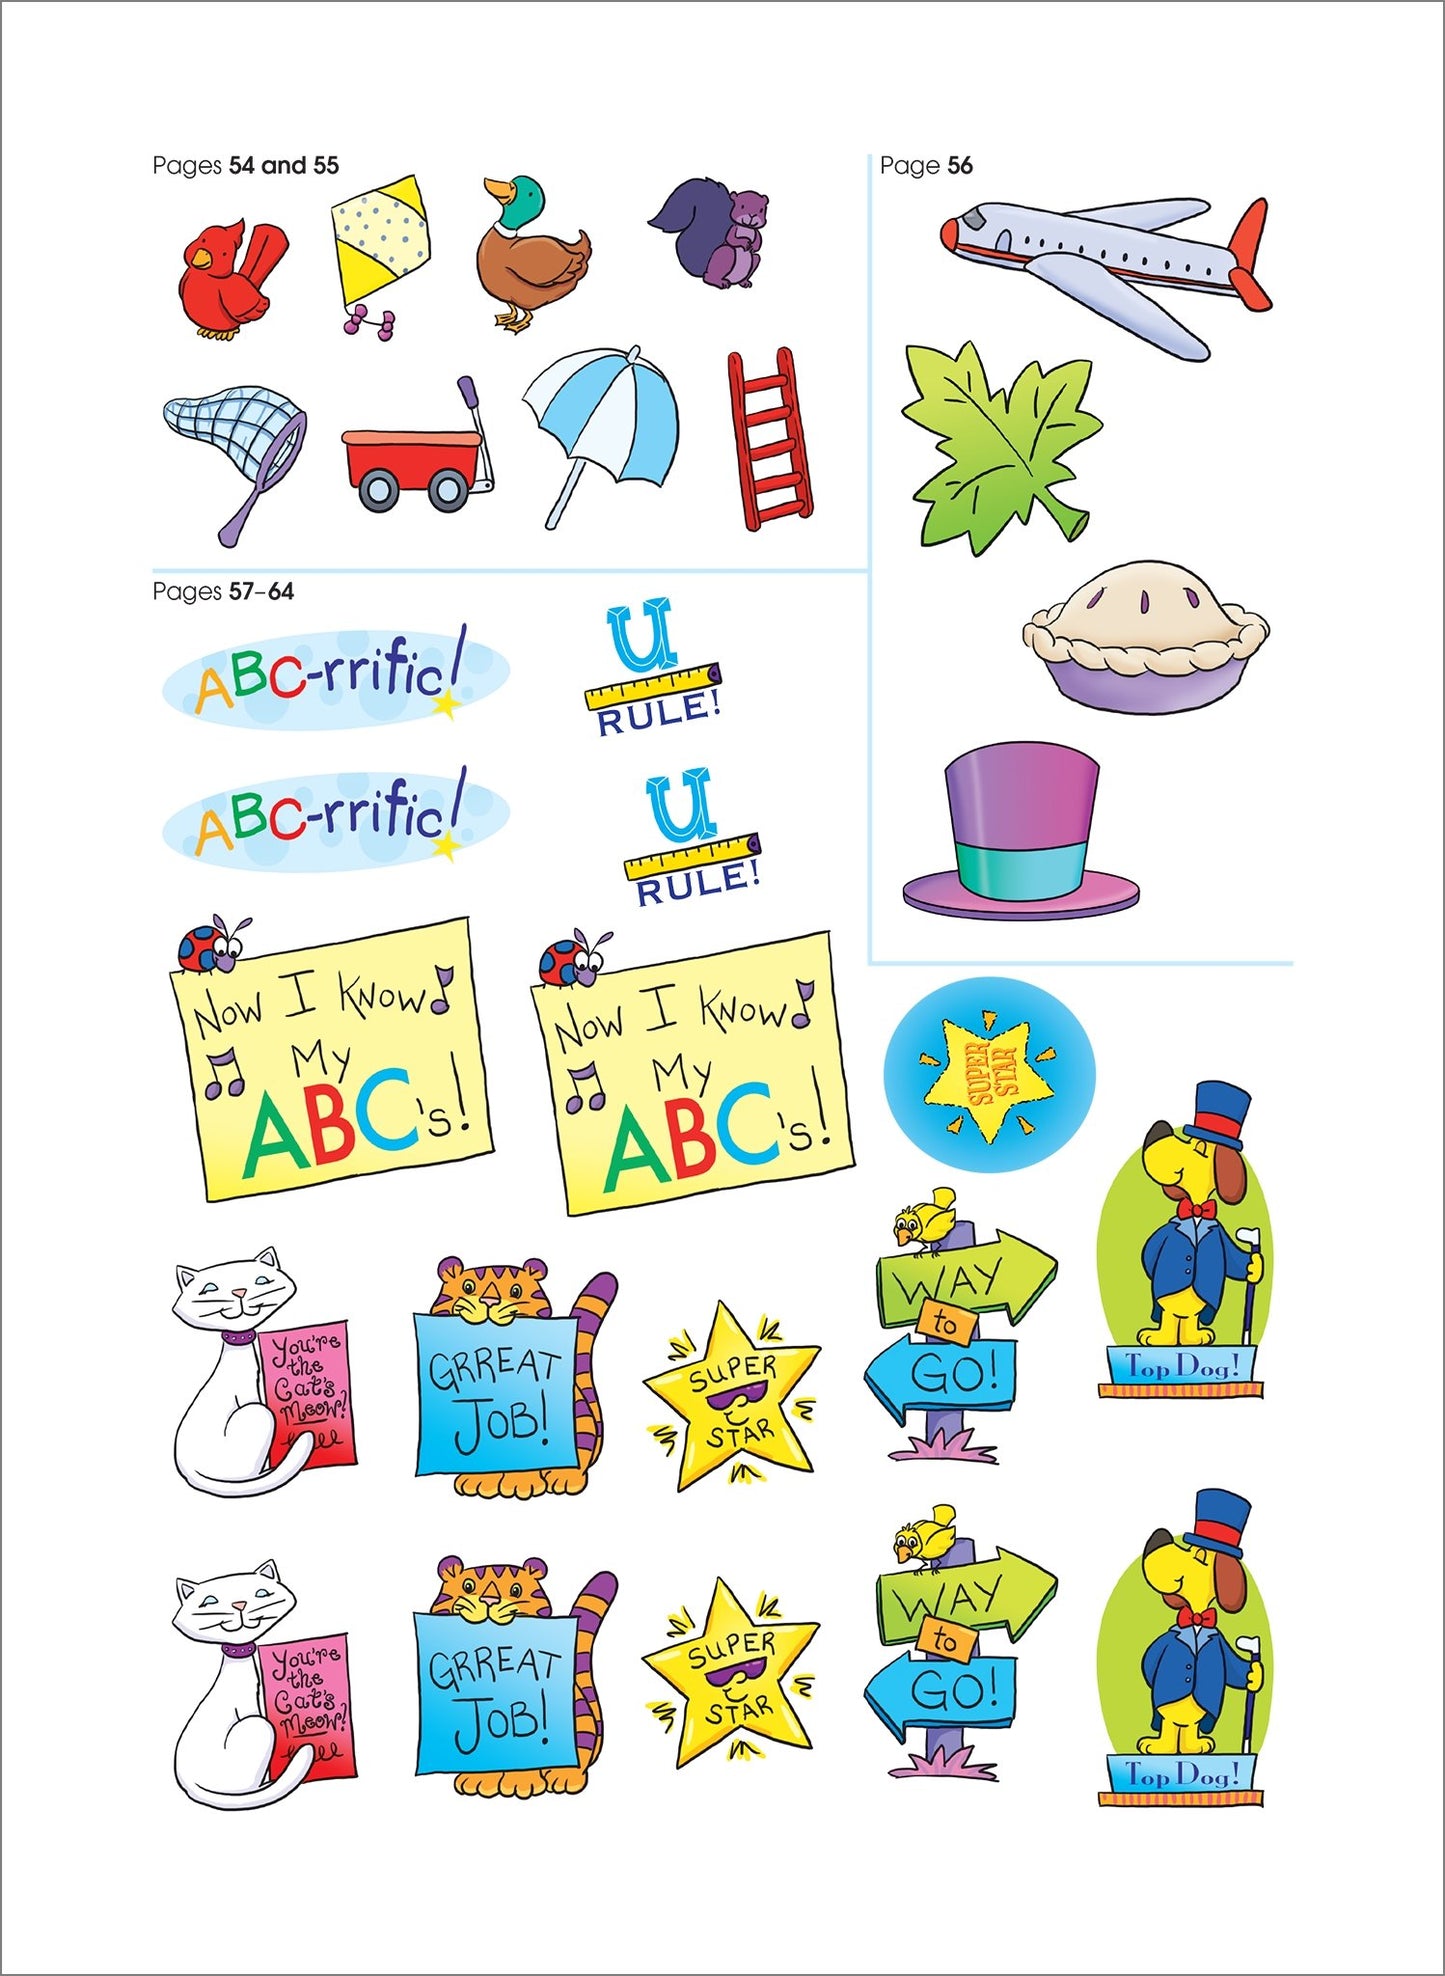 Alphabet Stickers Workbook - 64 Pages, Ages 3 to 6, Preschool to Kindergarten, ABCs, Printing Letters, Matching, and More